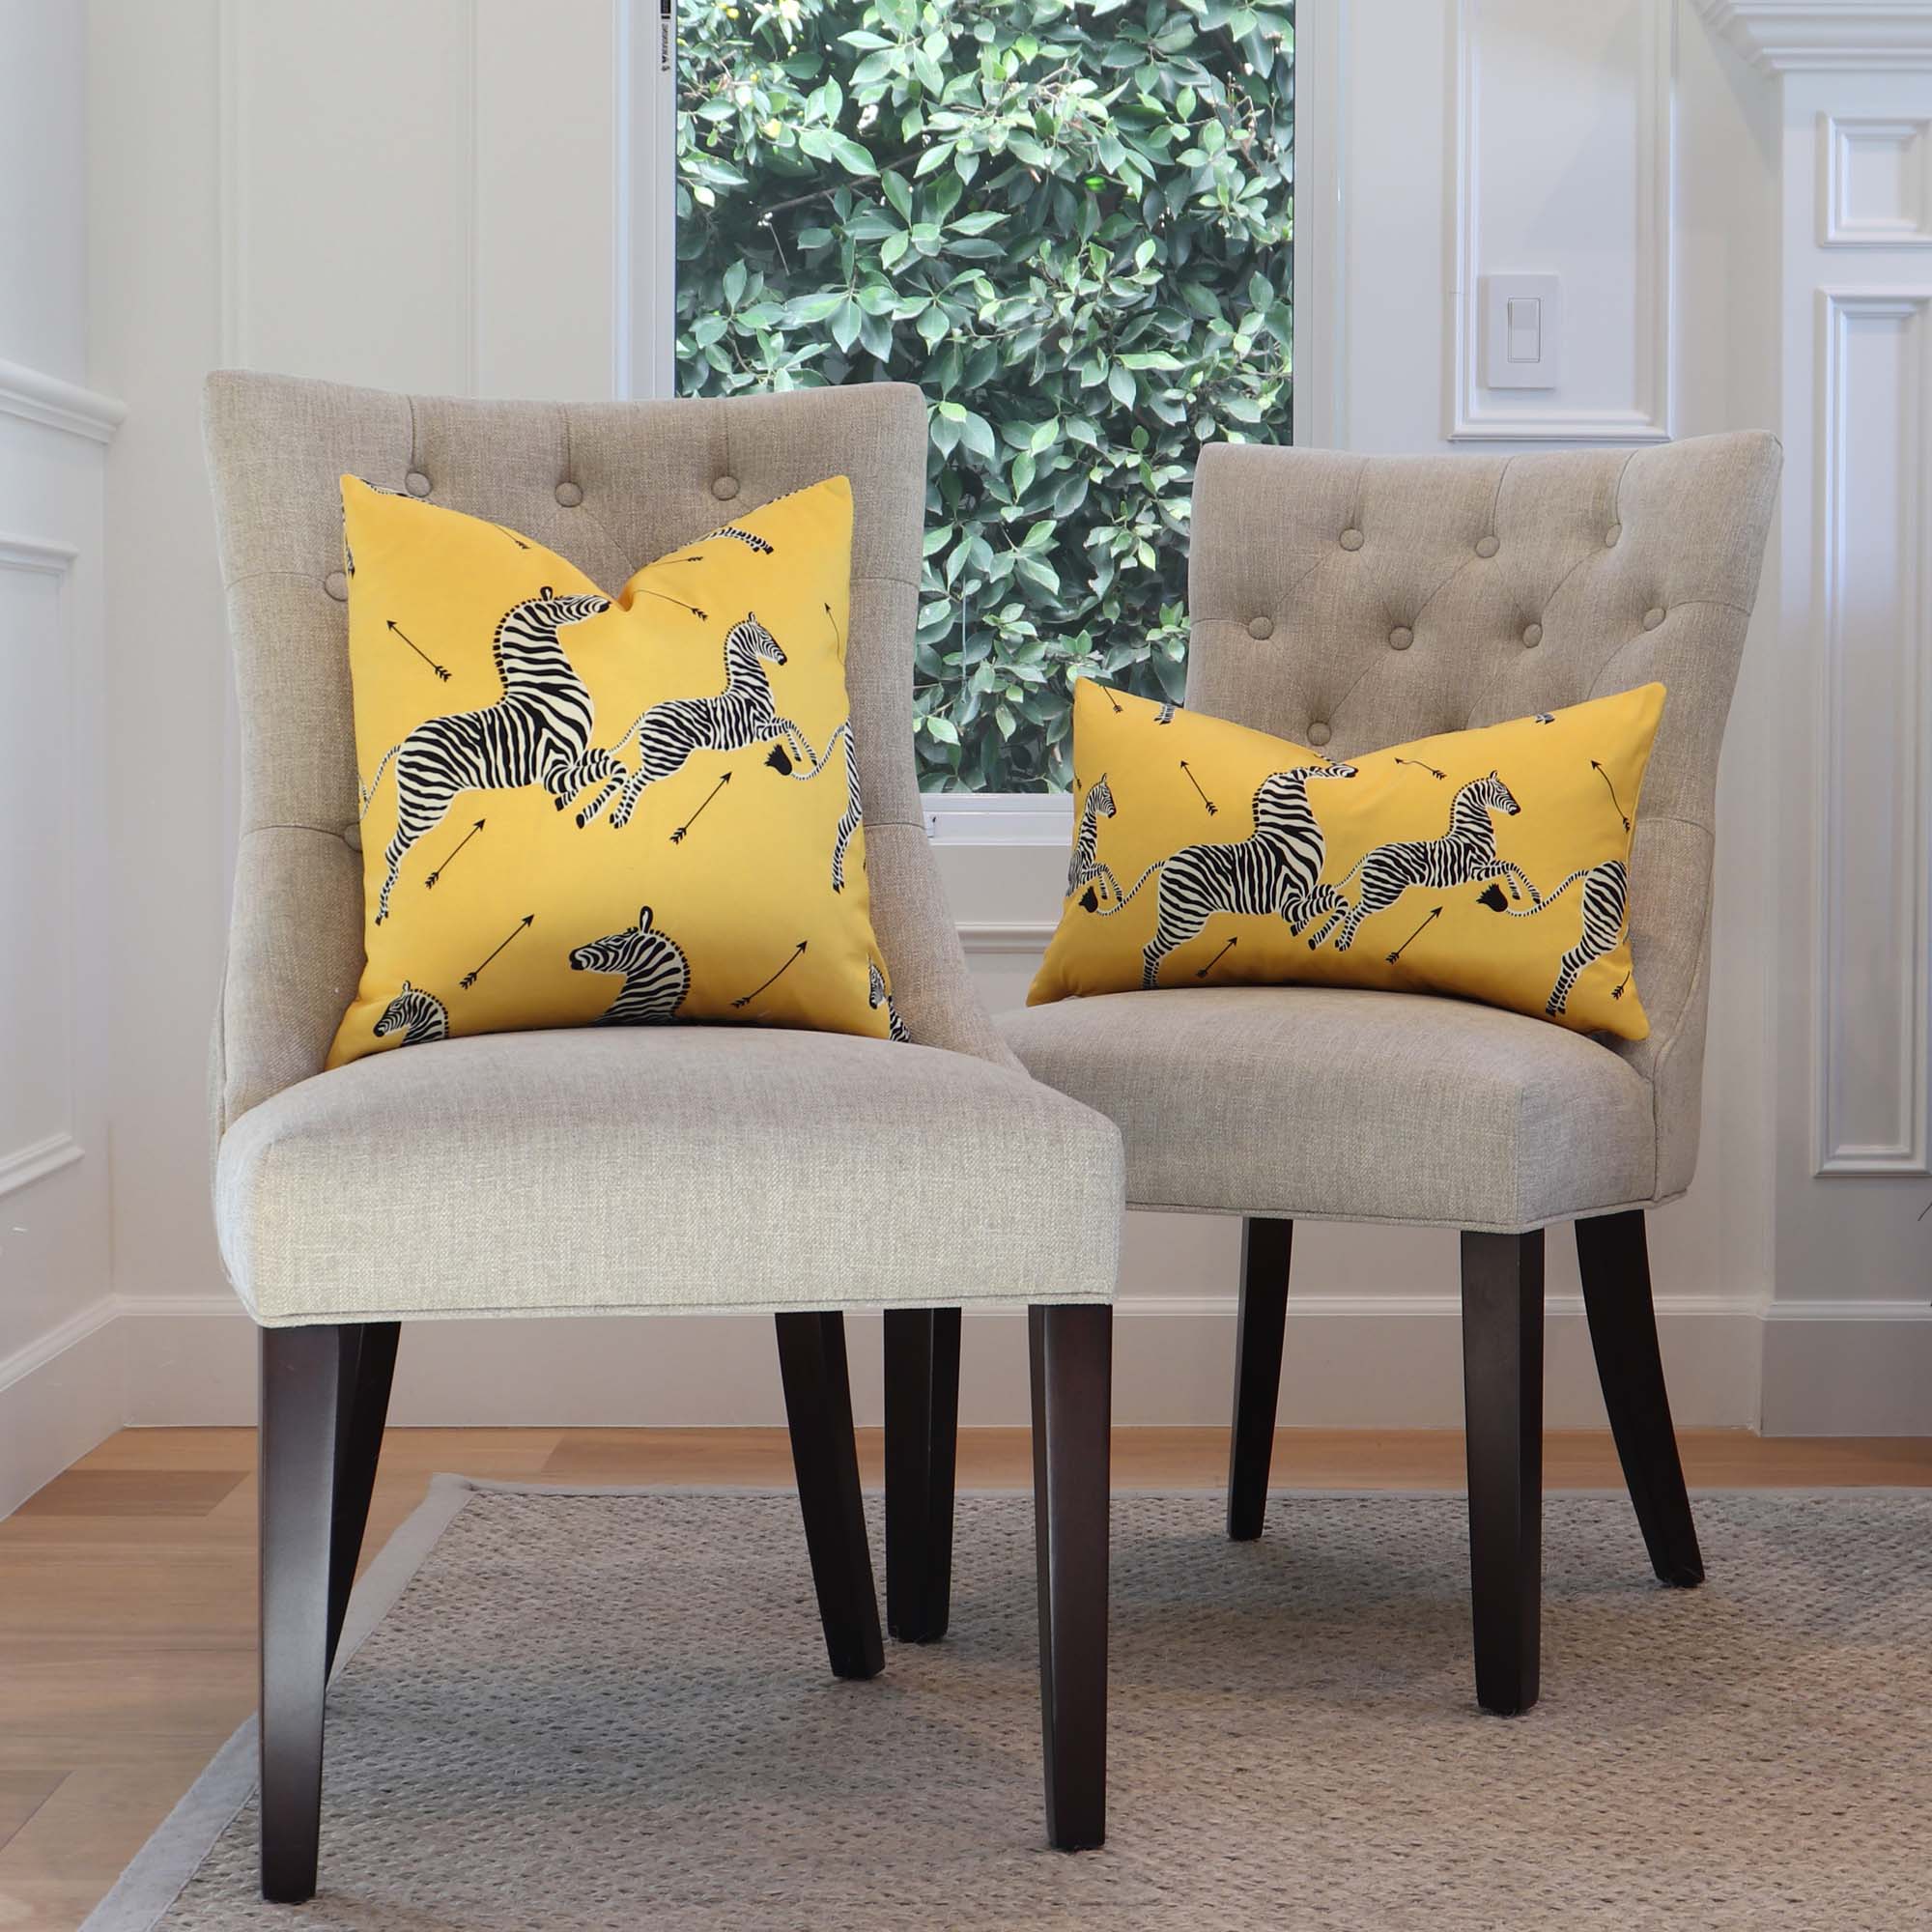 Scalamandre Zebras Petite Yellow Designer Animal Print Throw Pillow Cover on Side Chairs in Living Space